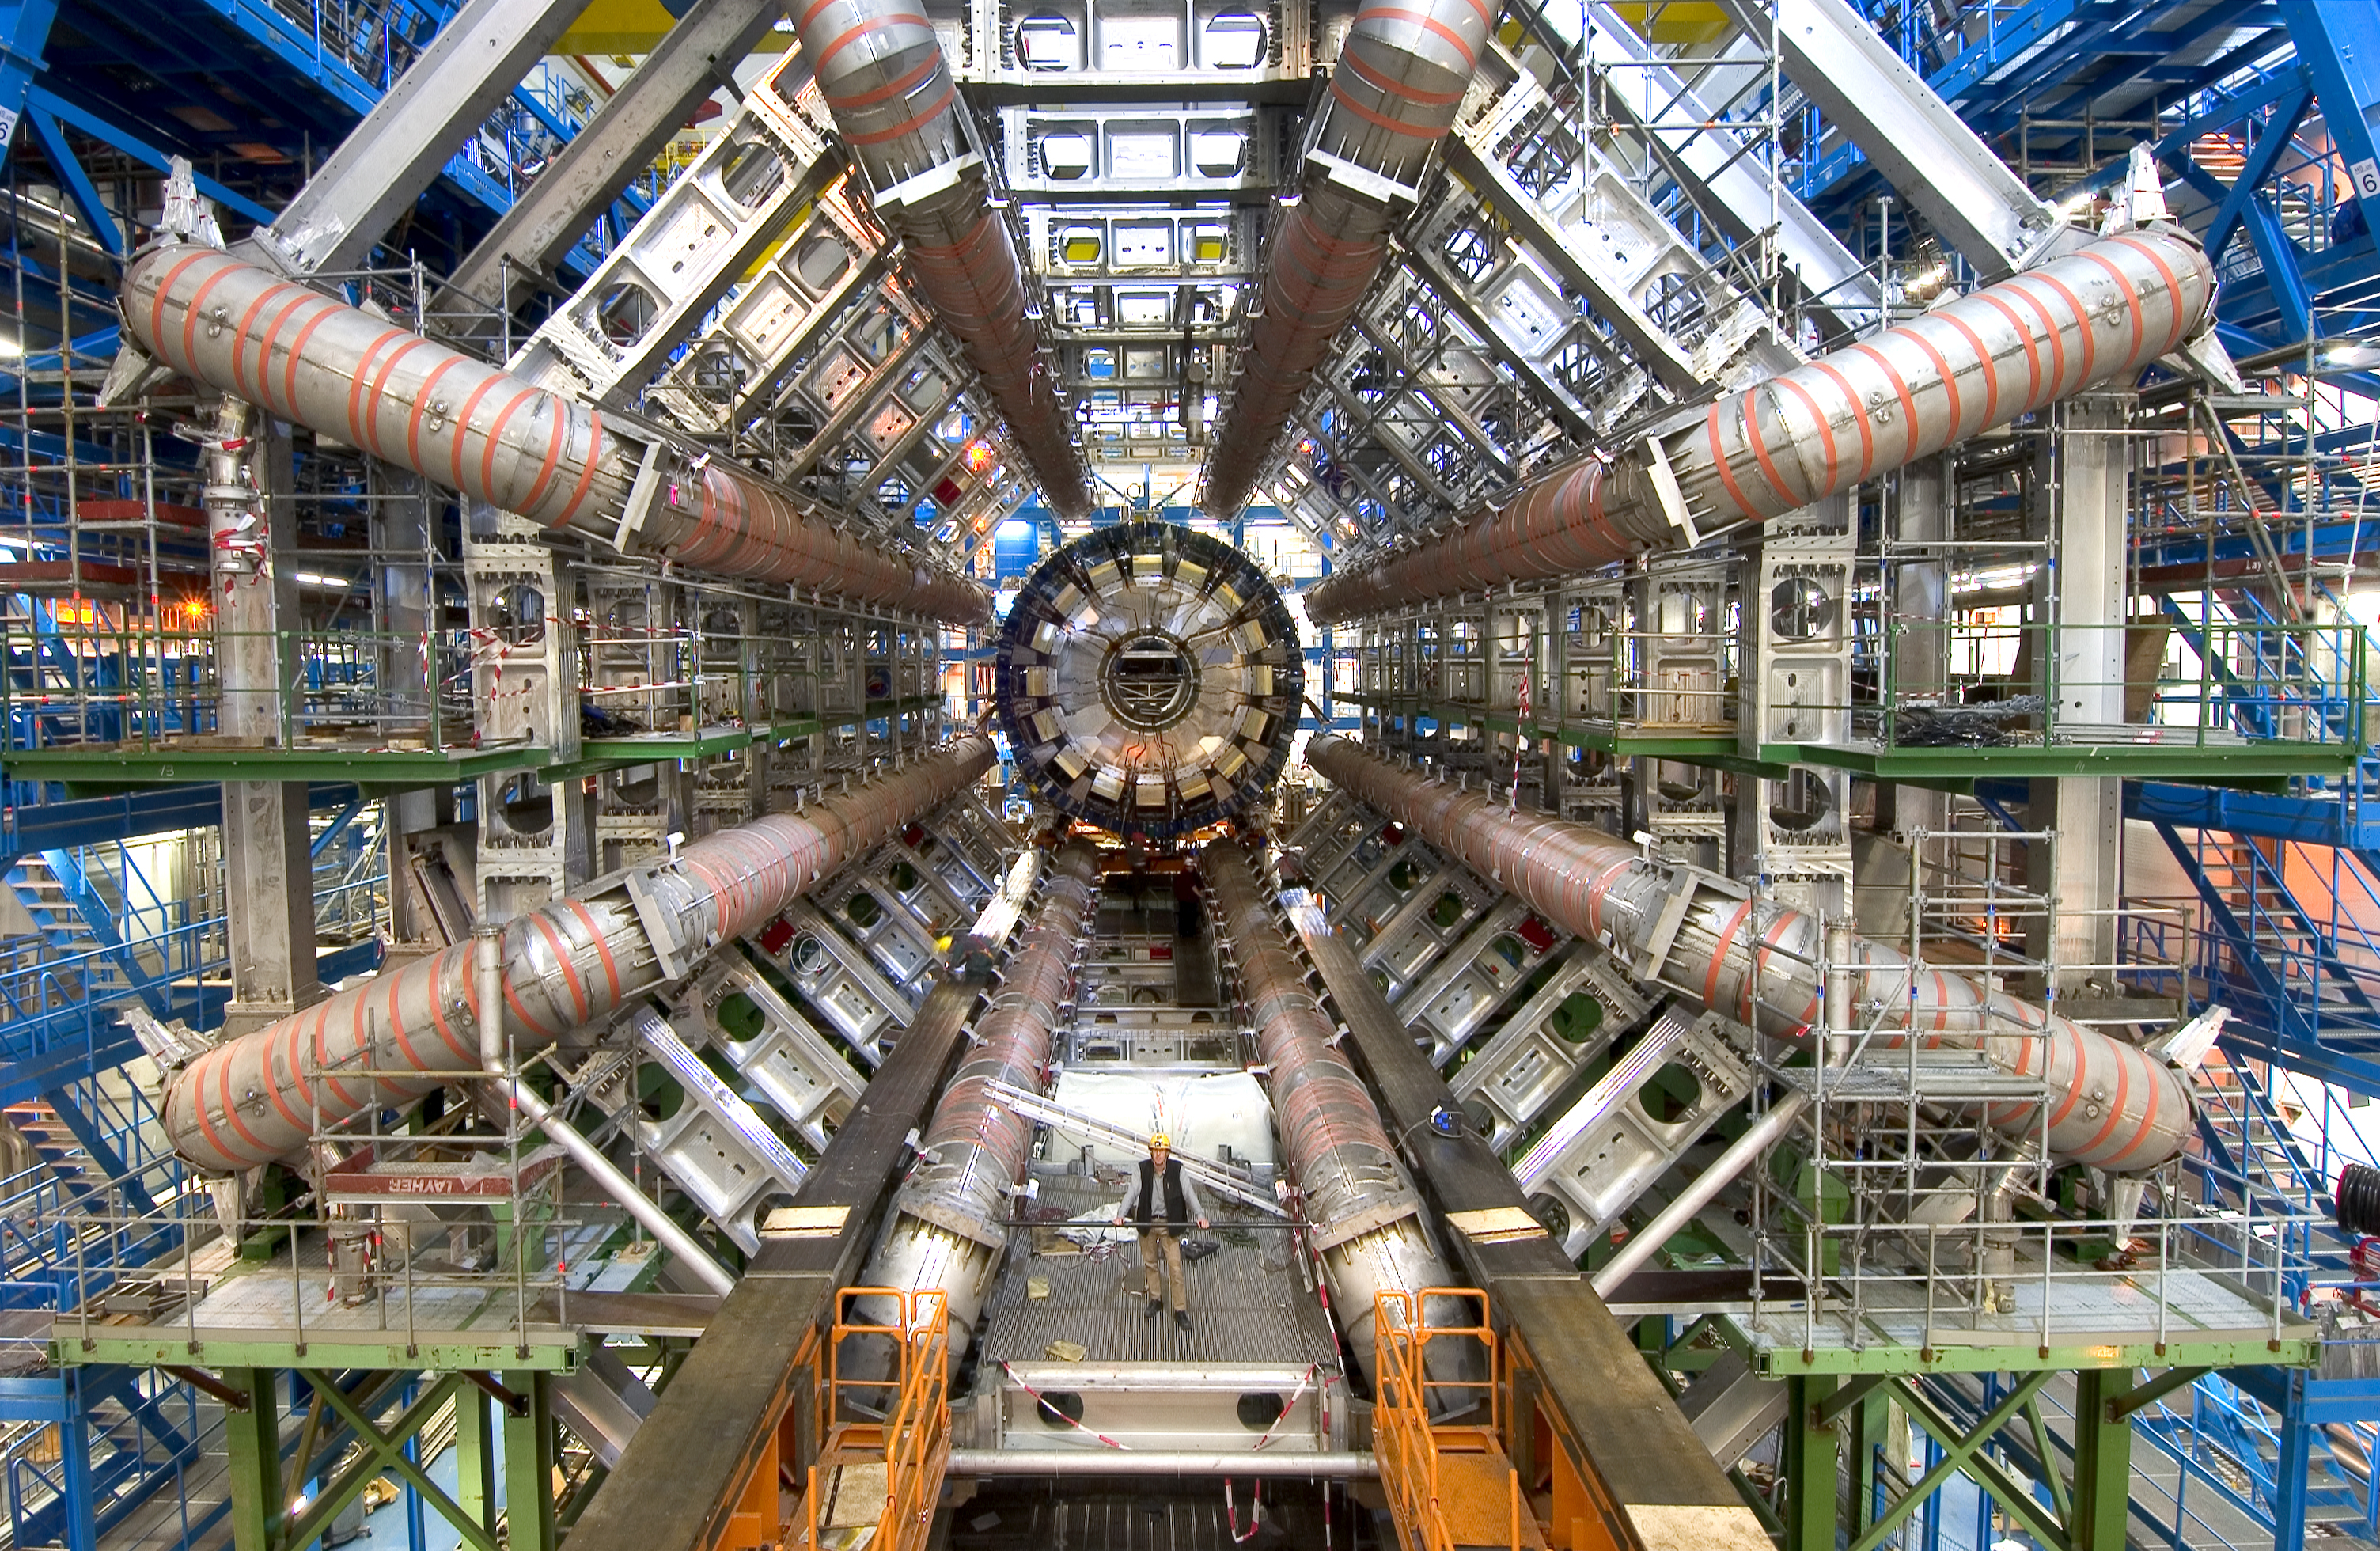 Dawn of the Large Hadron Collider